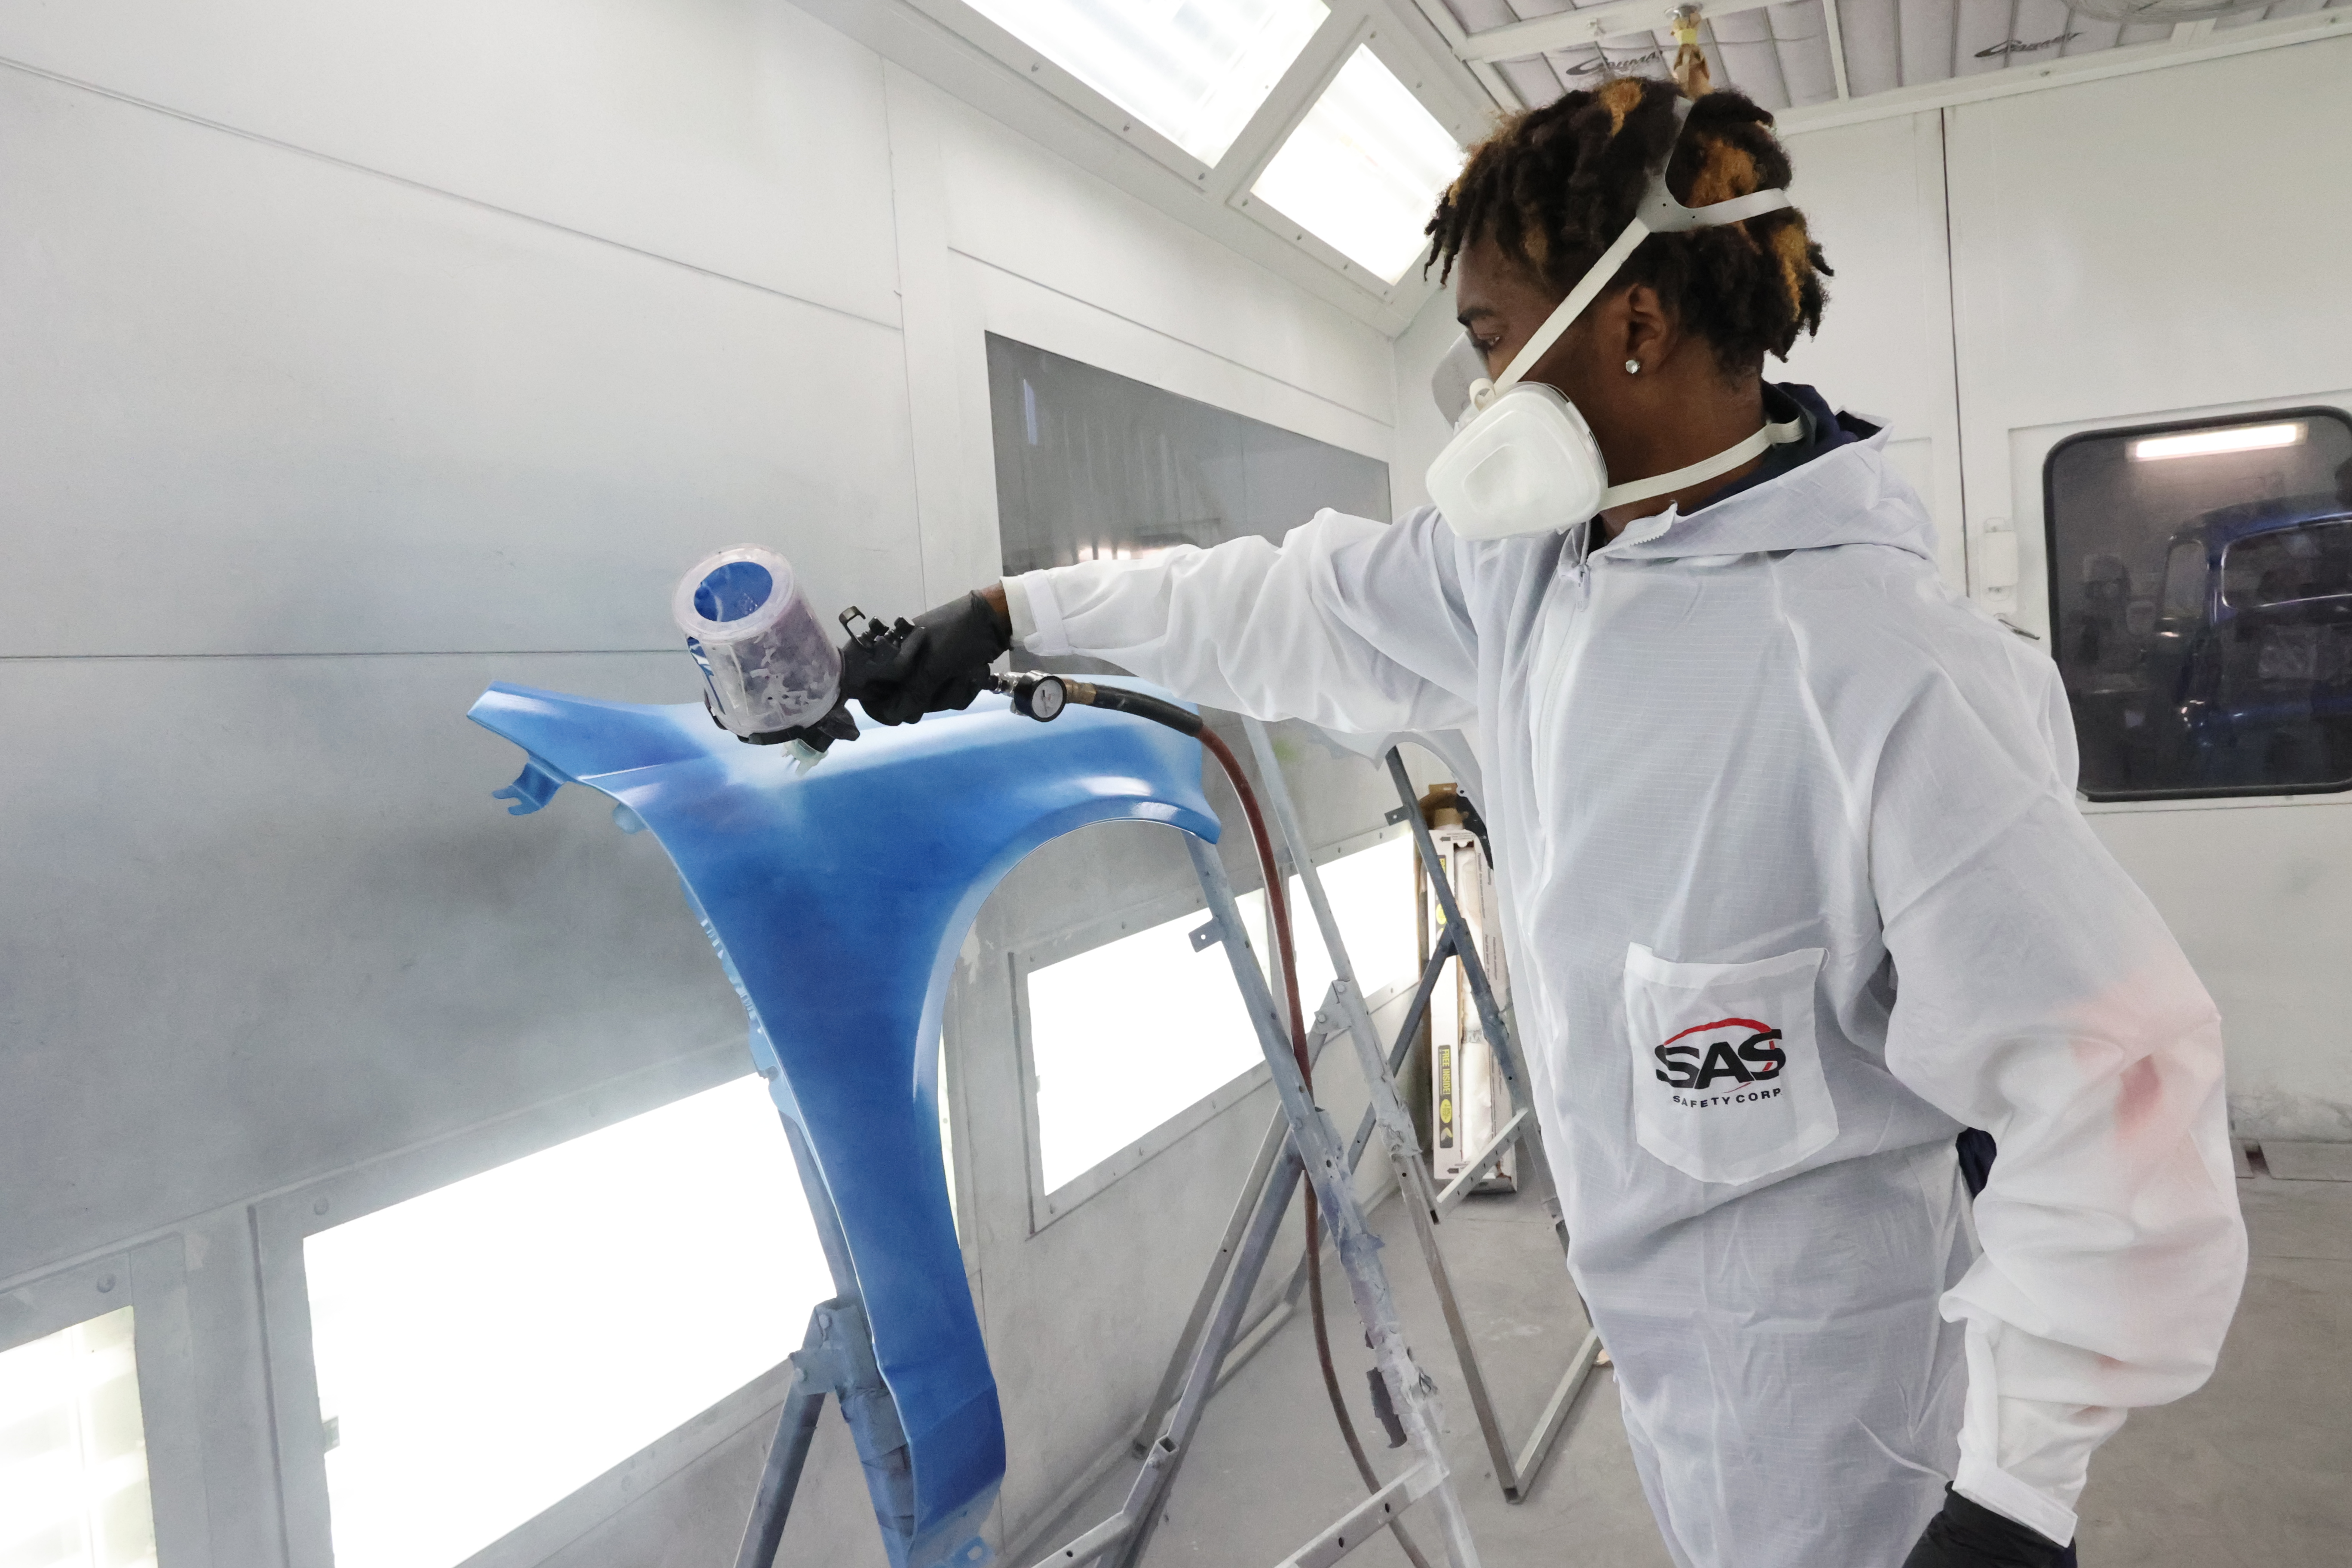 A Black, male student is in a white paint suit and applying blue paint to a fender.